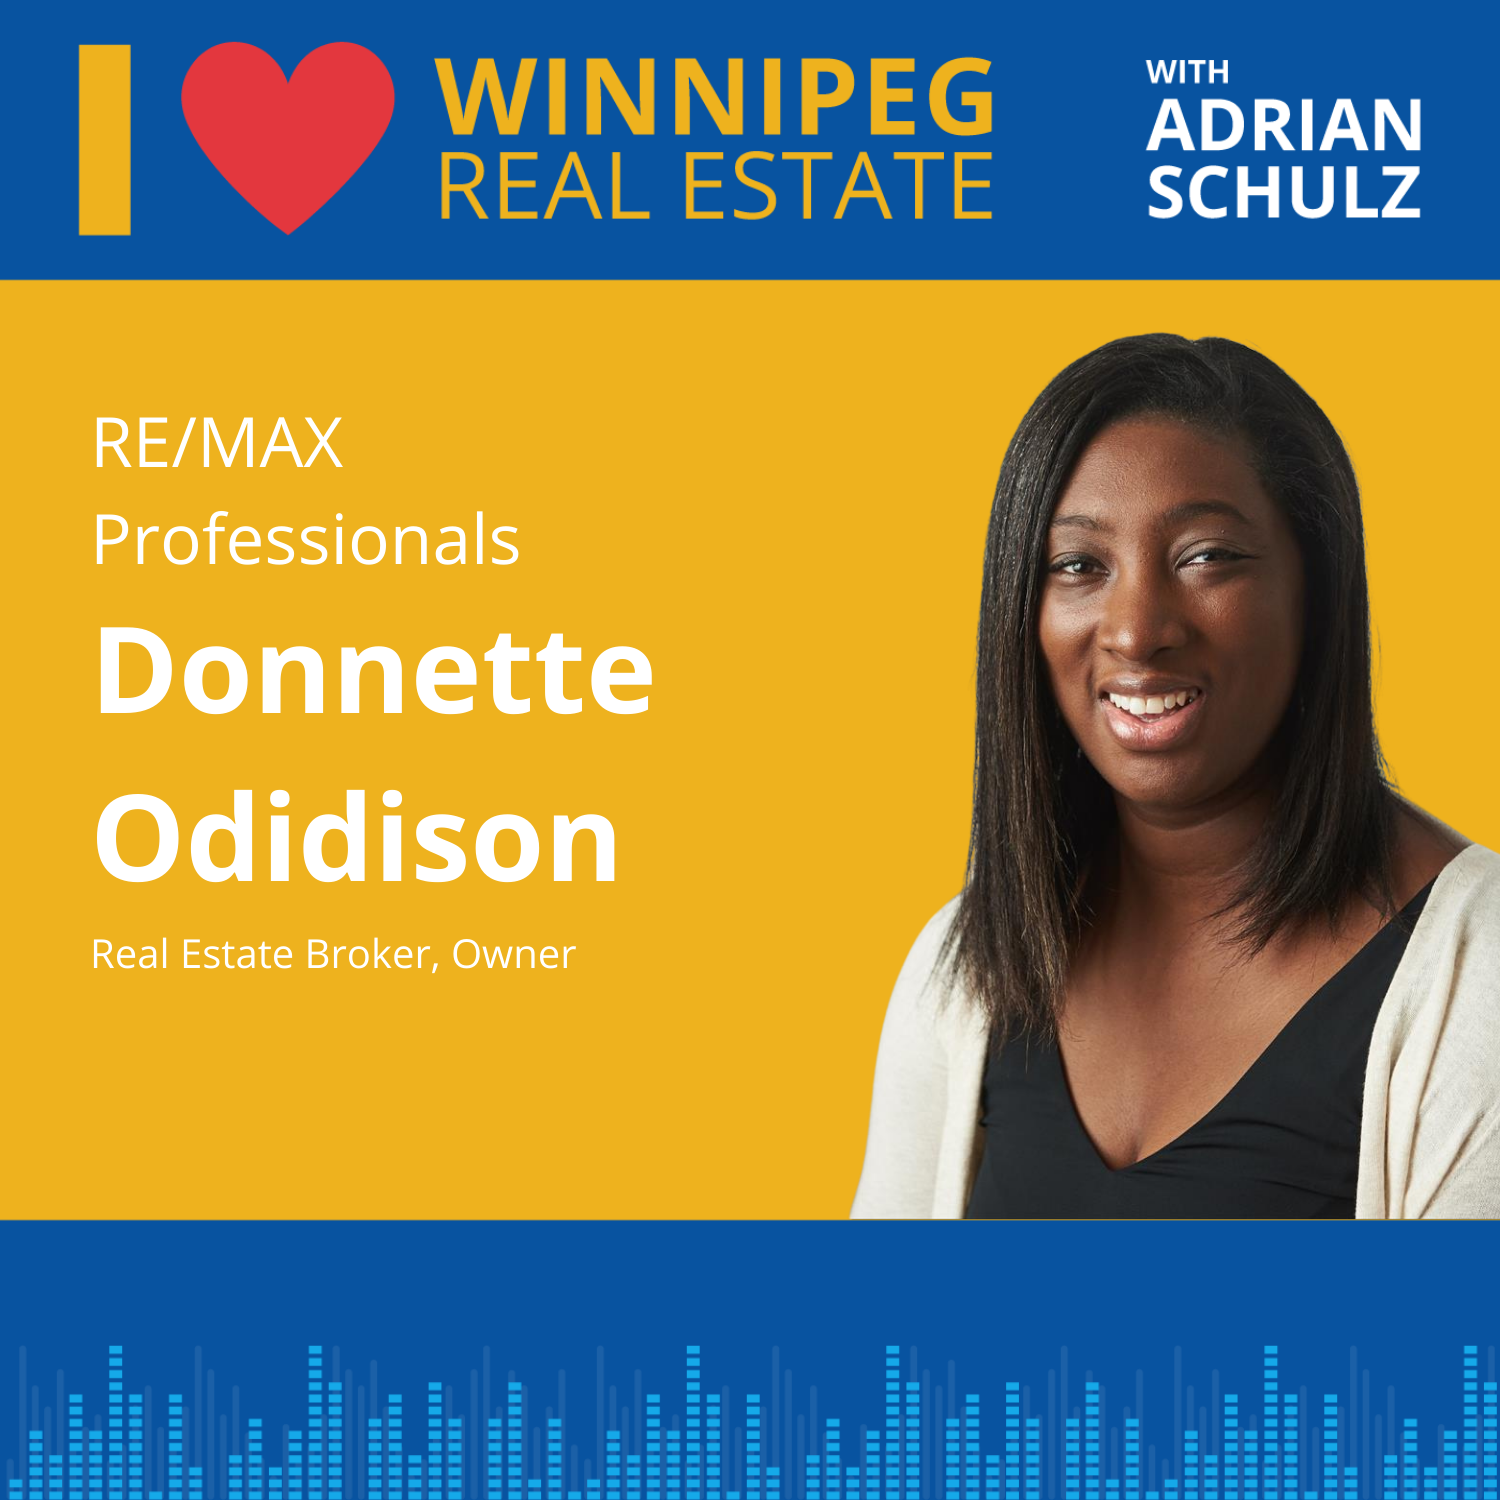 Donnette Odidison on becoming a real estate agent in Winnipeg